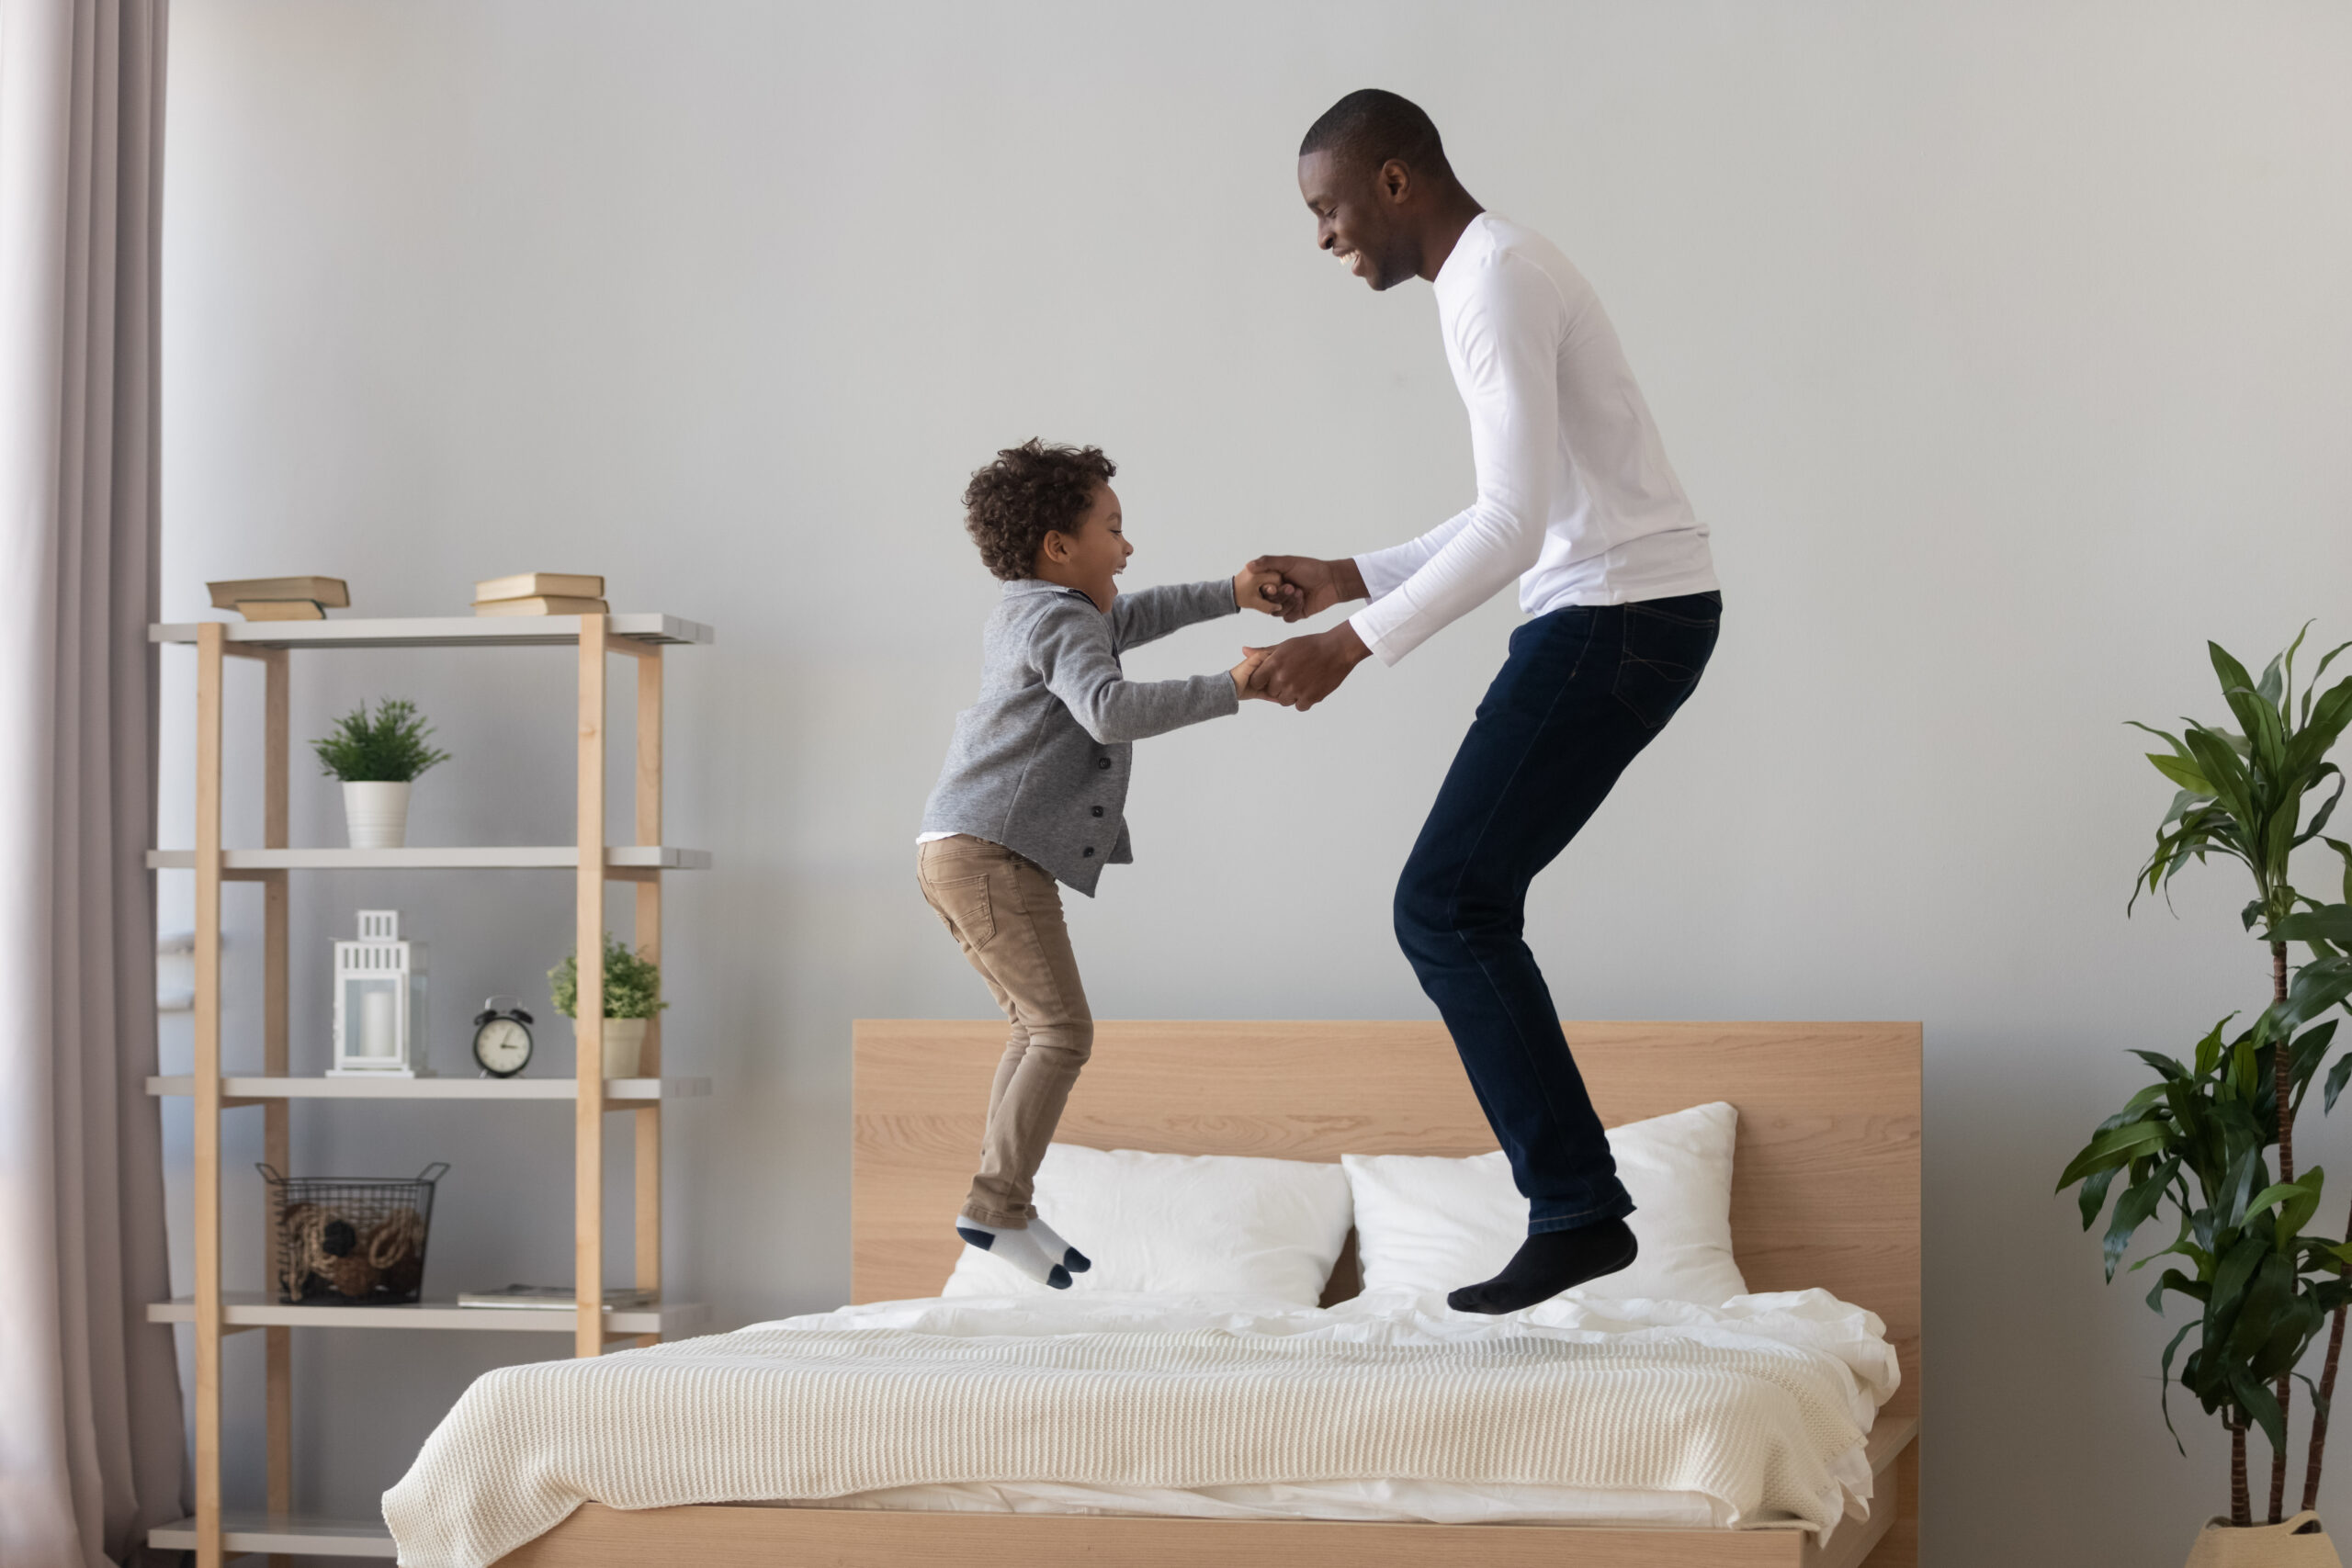 Don’t wait for a windfall to get a new mattress for your bed. Here are our top tips for finding a mattress that's good for your back and your budget.